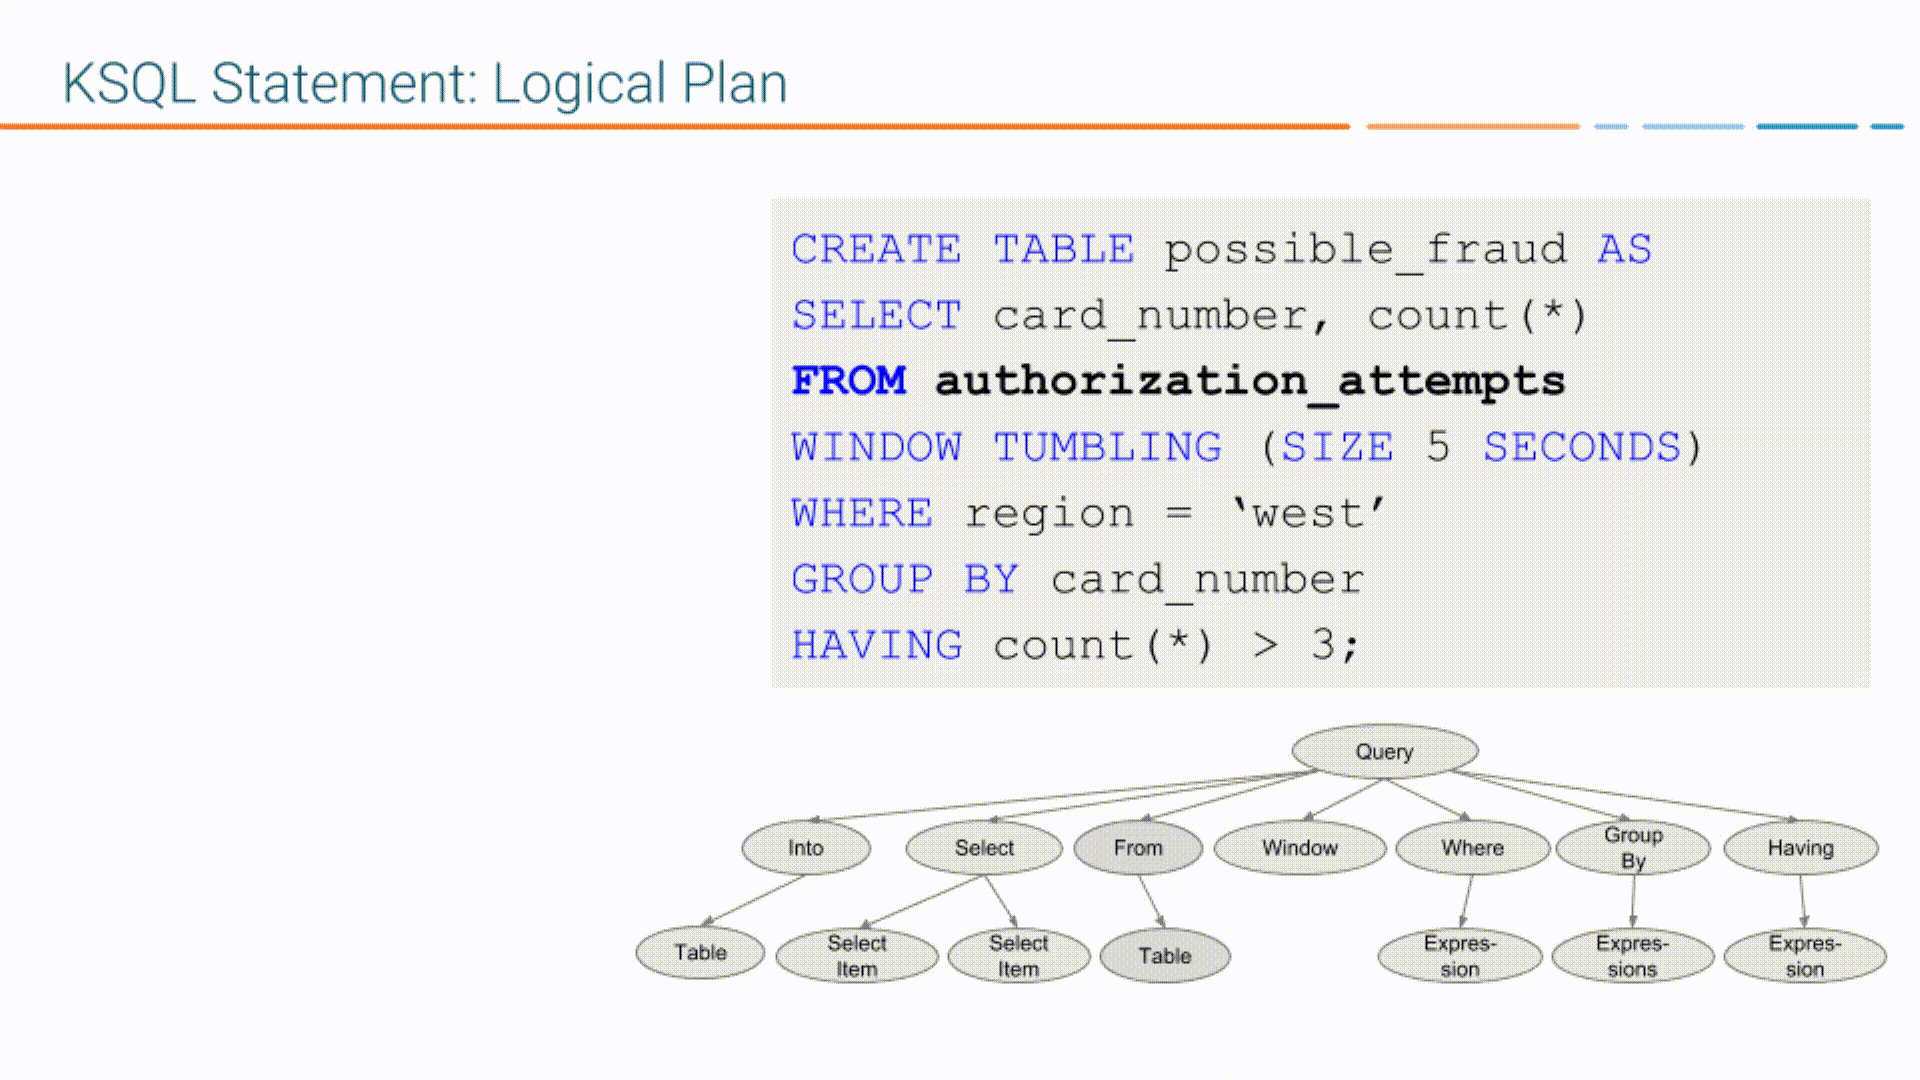 Diagram showing how the KSQL engine creates a logical plan for a KSQL statement